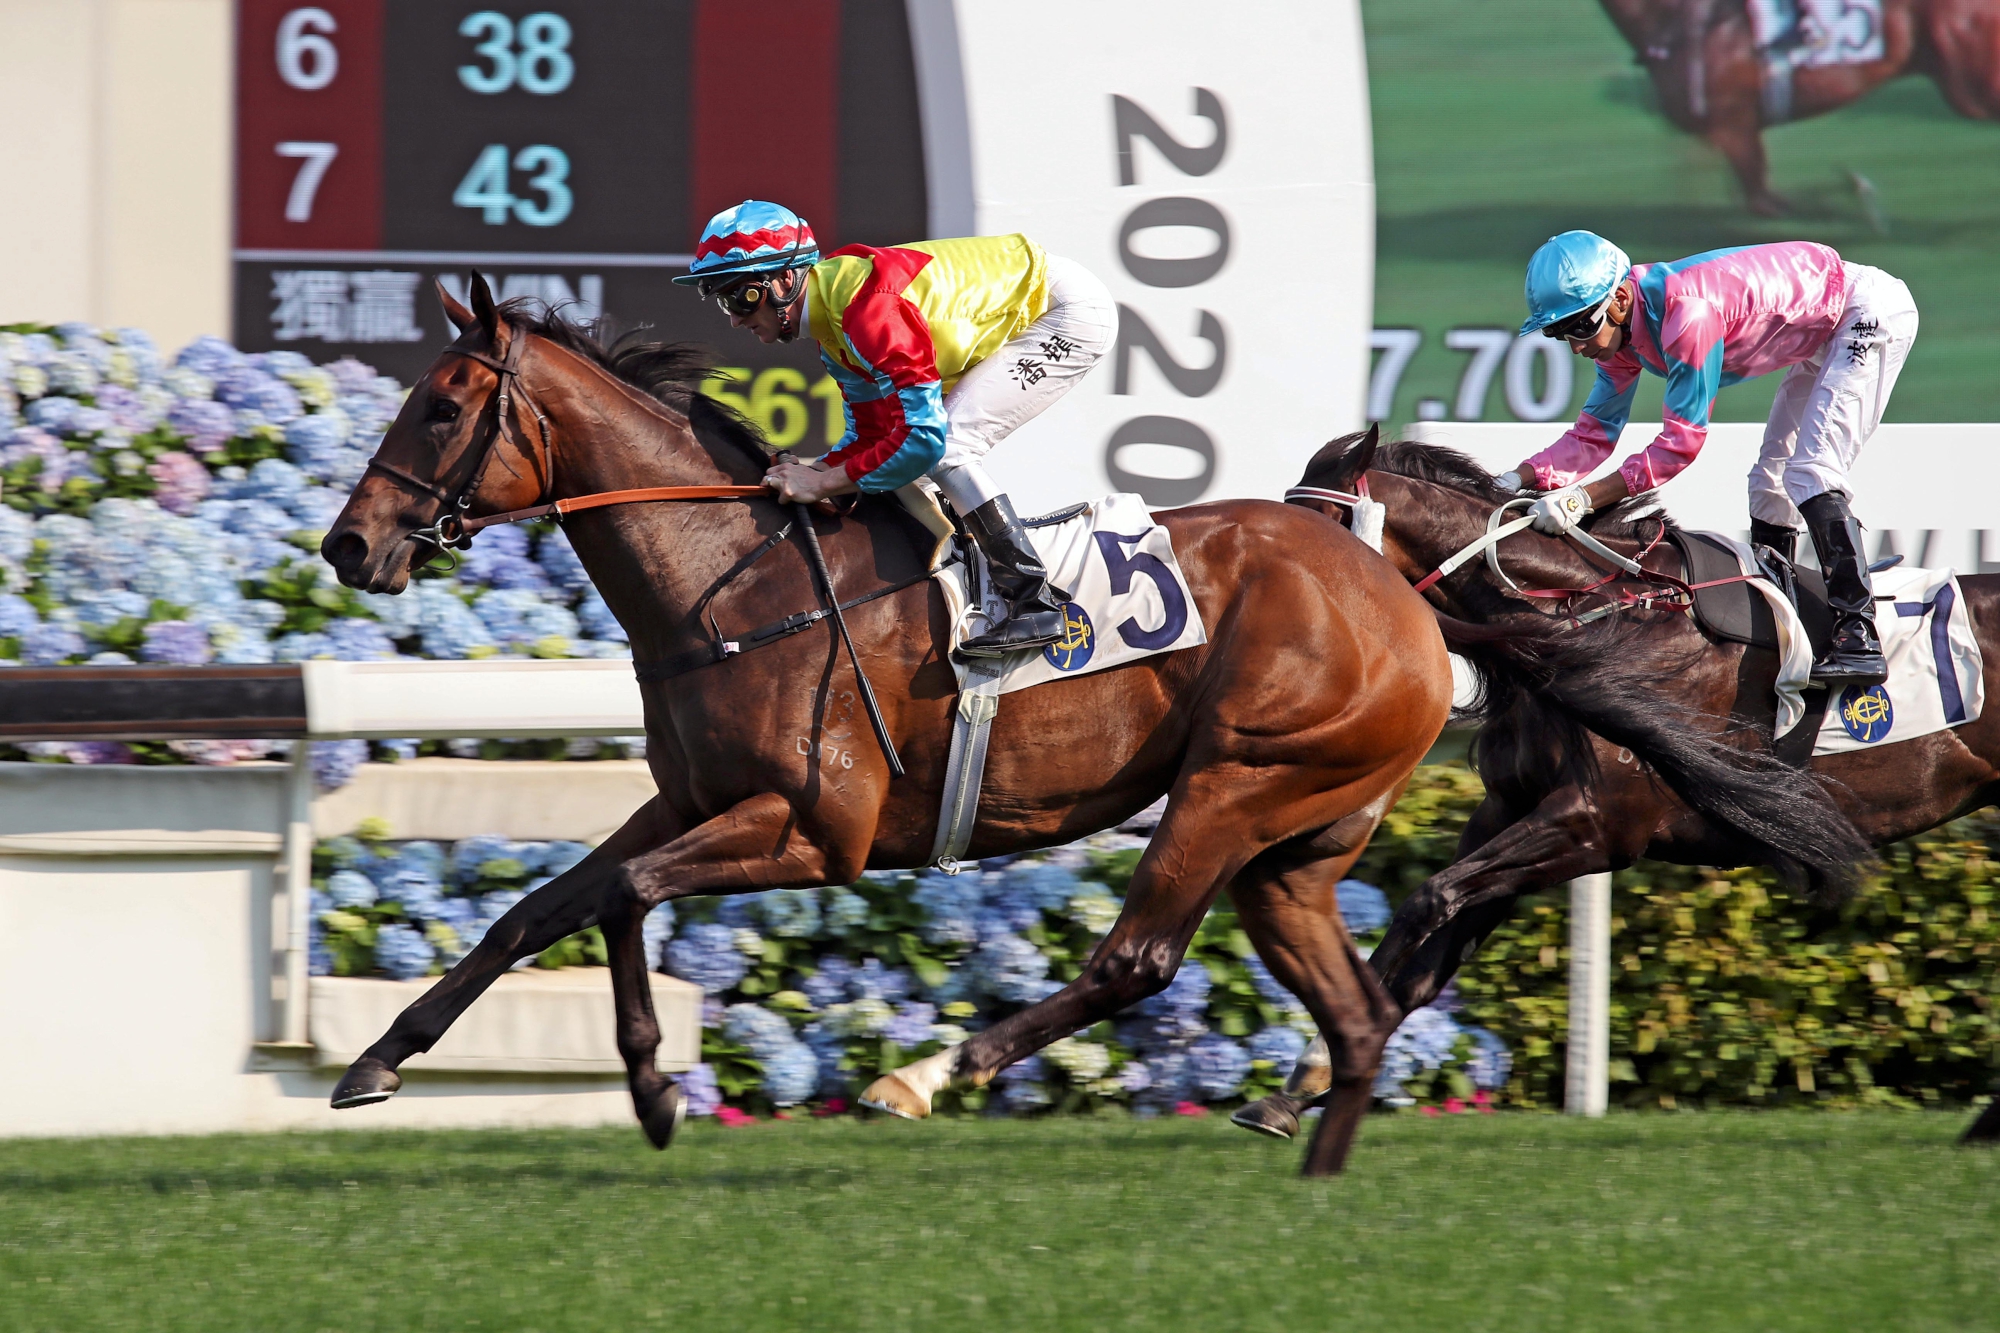 Wellington is a three-time winner from four starts in Hong Kong.